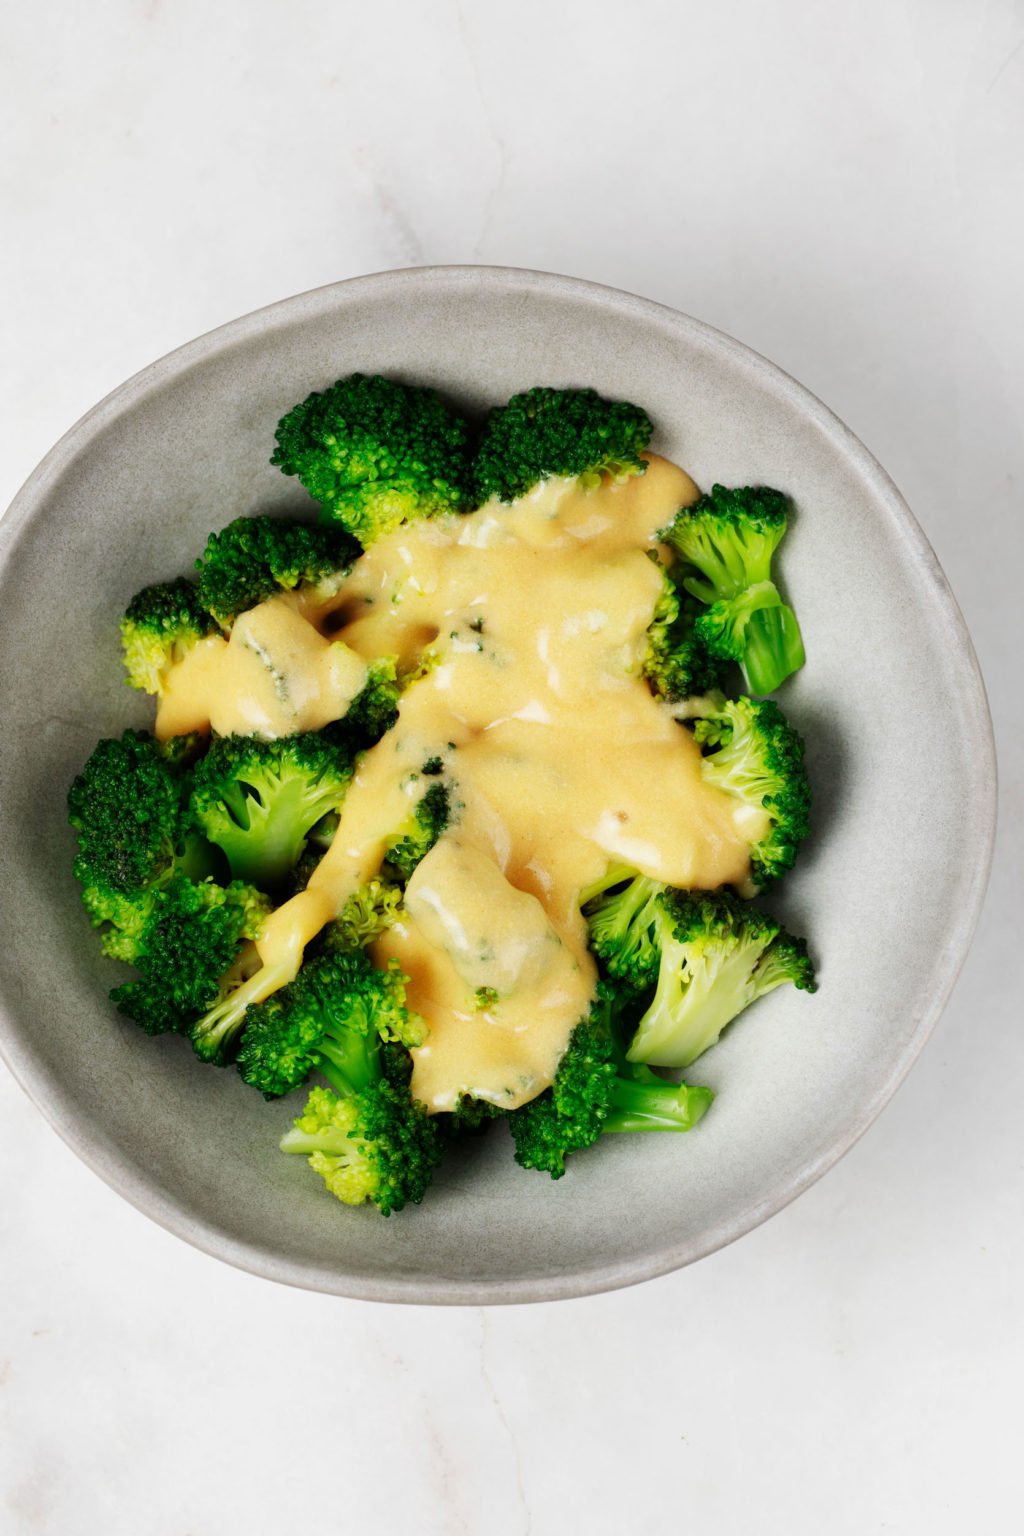 A bowl of steamed broccoli has been topped with a vegan cheddar cheese sauce.